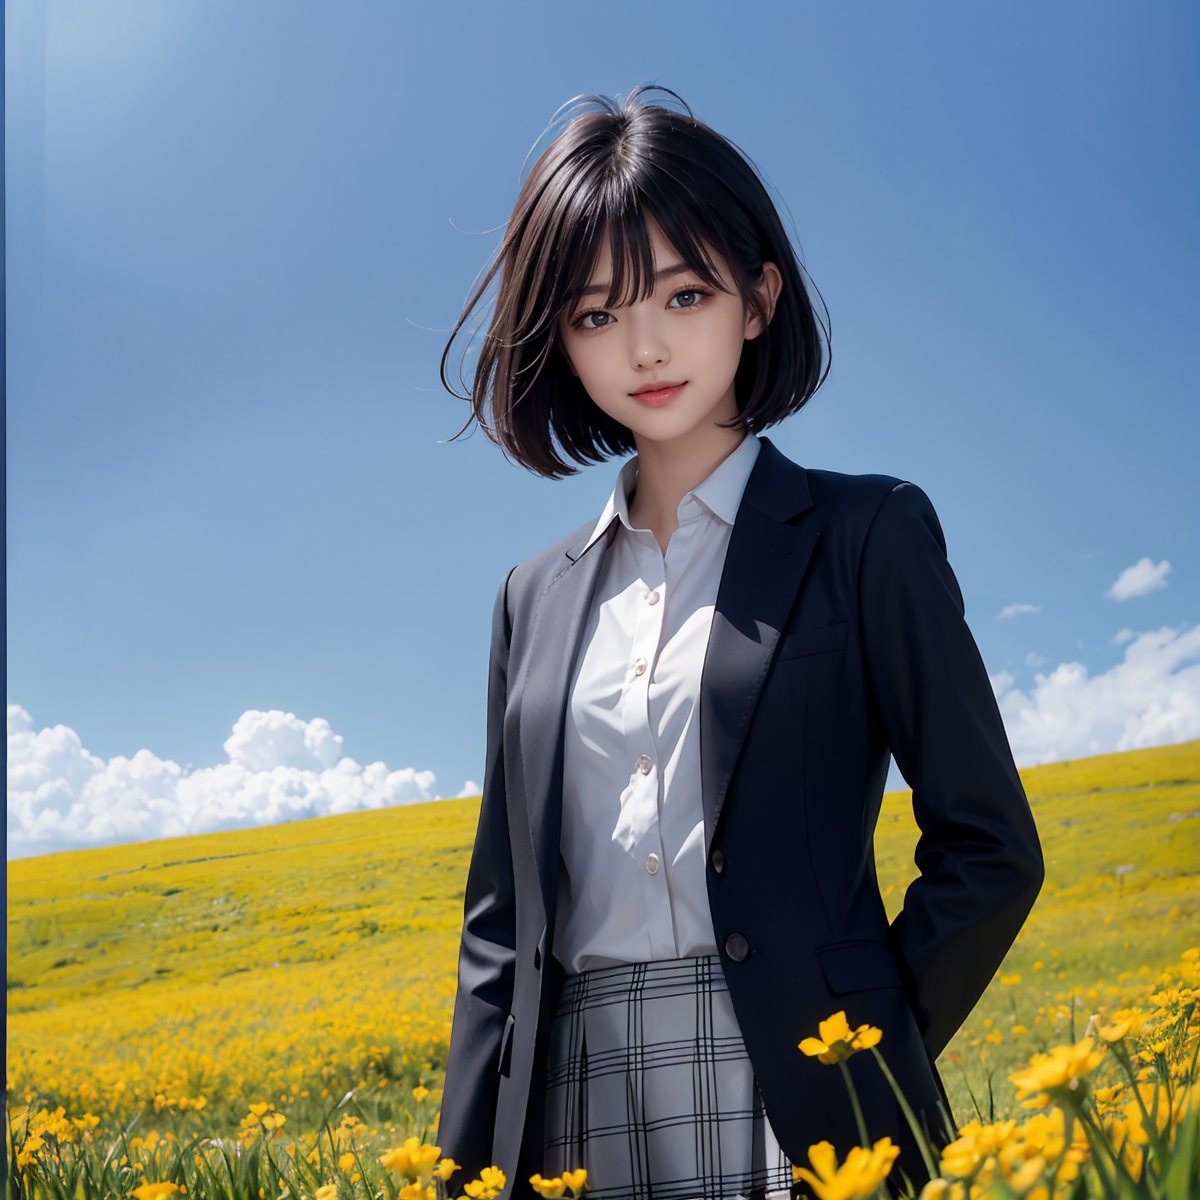 Fractal art that is mesmerizing and visually stunning. Official art, masterpiece. 4K high resolution rendering. One Japanese girl, 17 years old, 5 feet tall. Straight, medium bob black hair, bangs, dark brown eyes, short eyelashes. Calm smile. Small breasts. Standing posture. Black blazer, white collared shirt, checked skirt. Grass field in park. Spring, daytime, blue sky, yellow flowers. Cowboy shot.